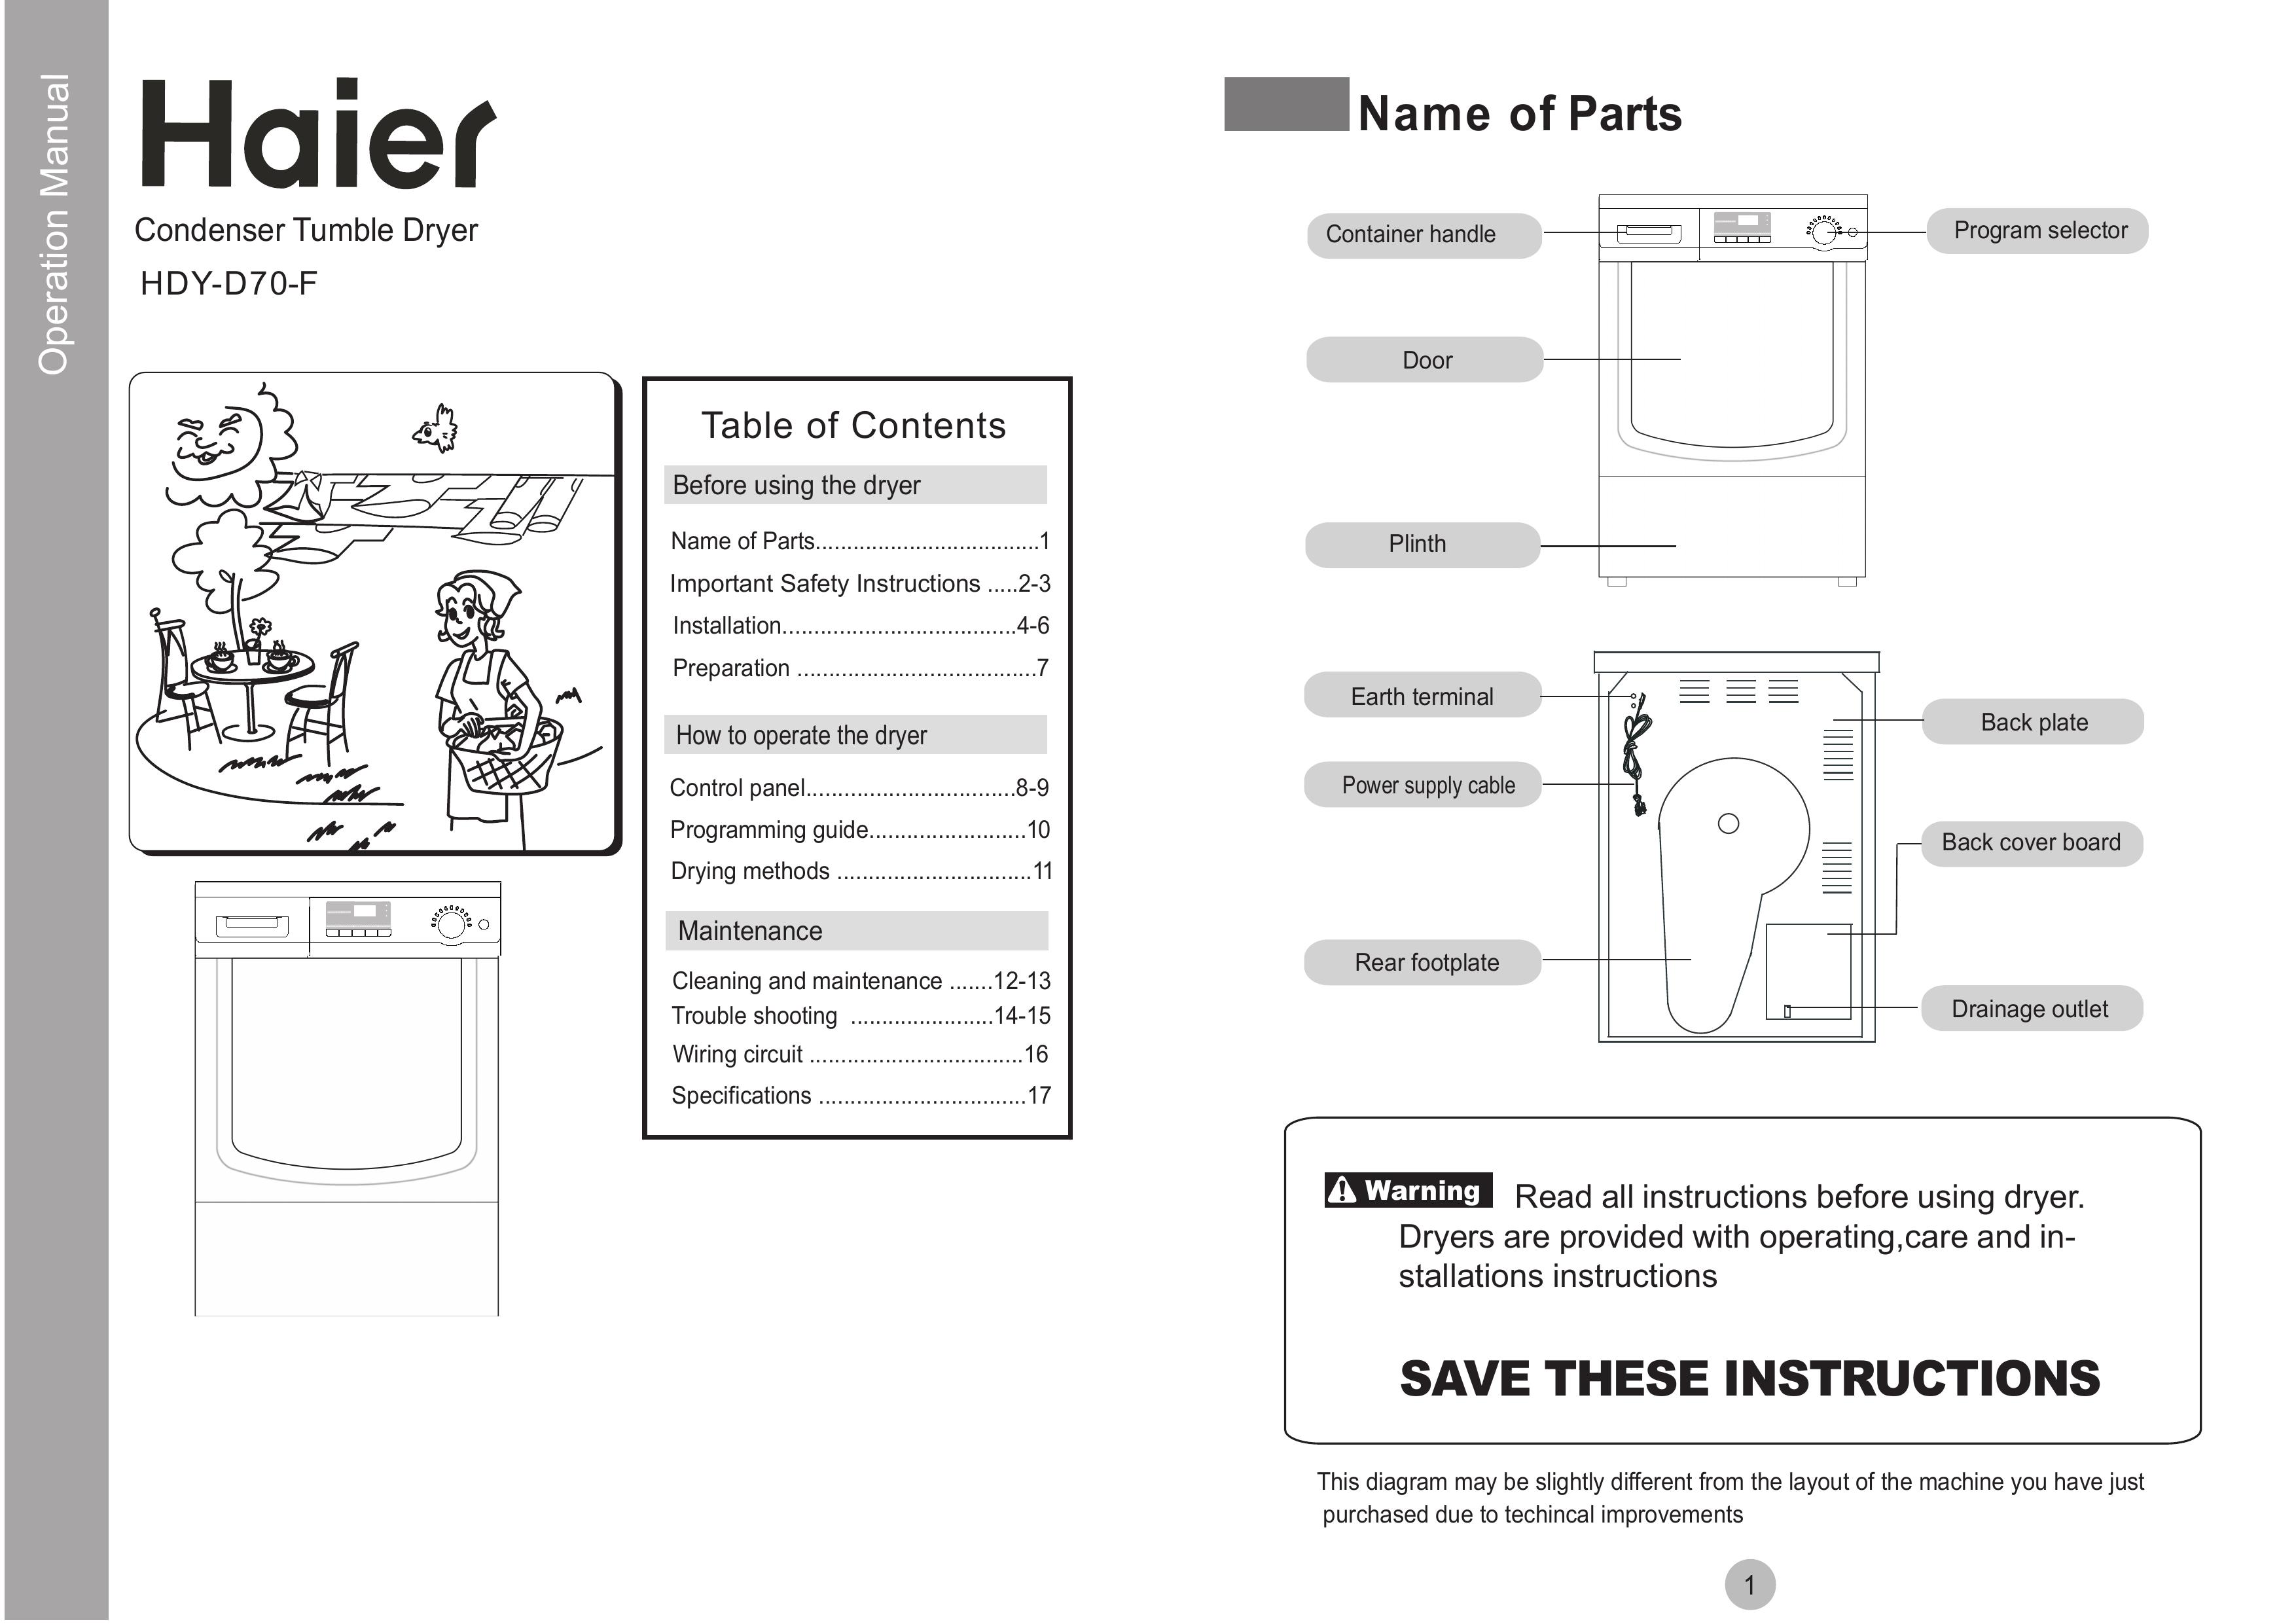 Haier HDY-D70-F Clothes Dryer User Manual